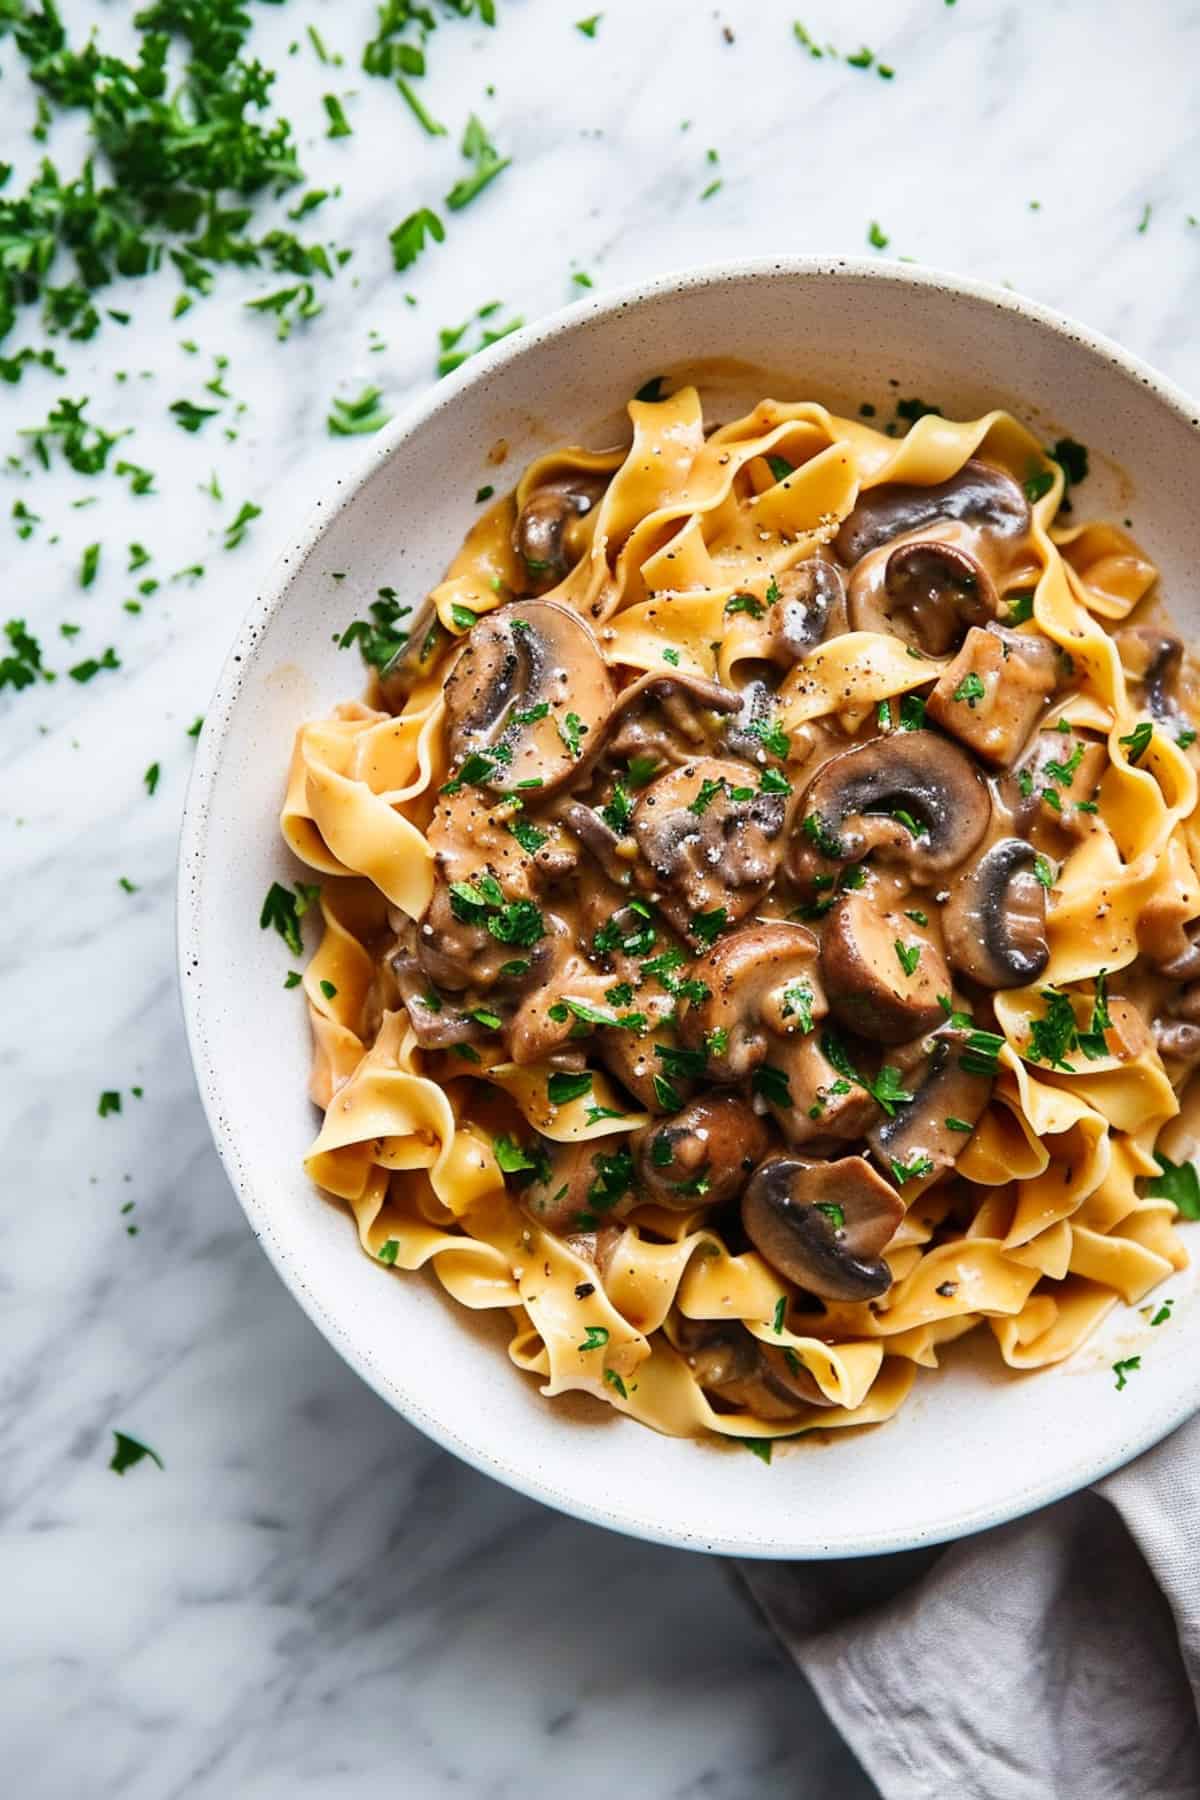 Creamy mushroom stroganoff with parsley and noodles in a white bowl.